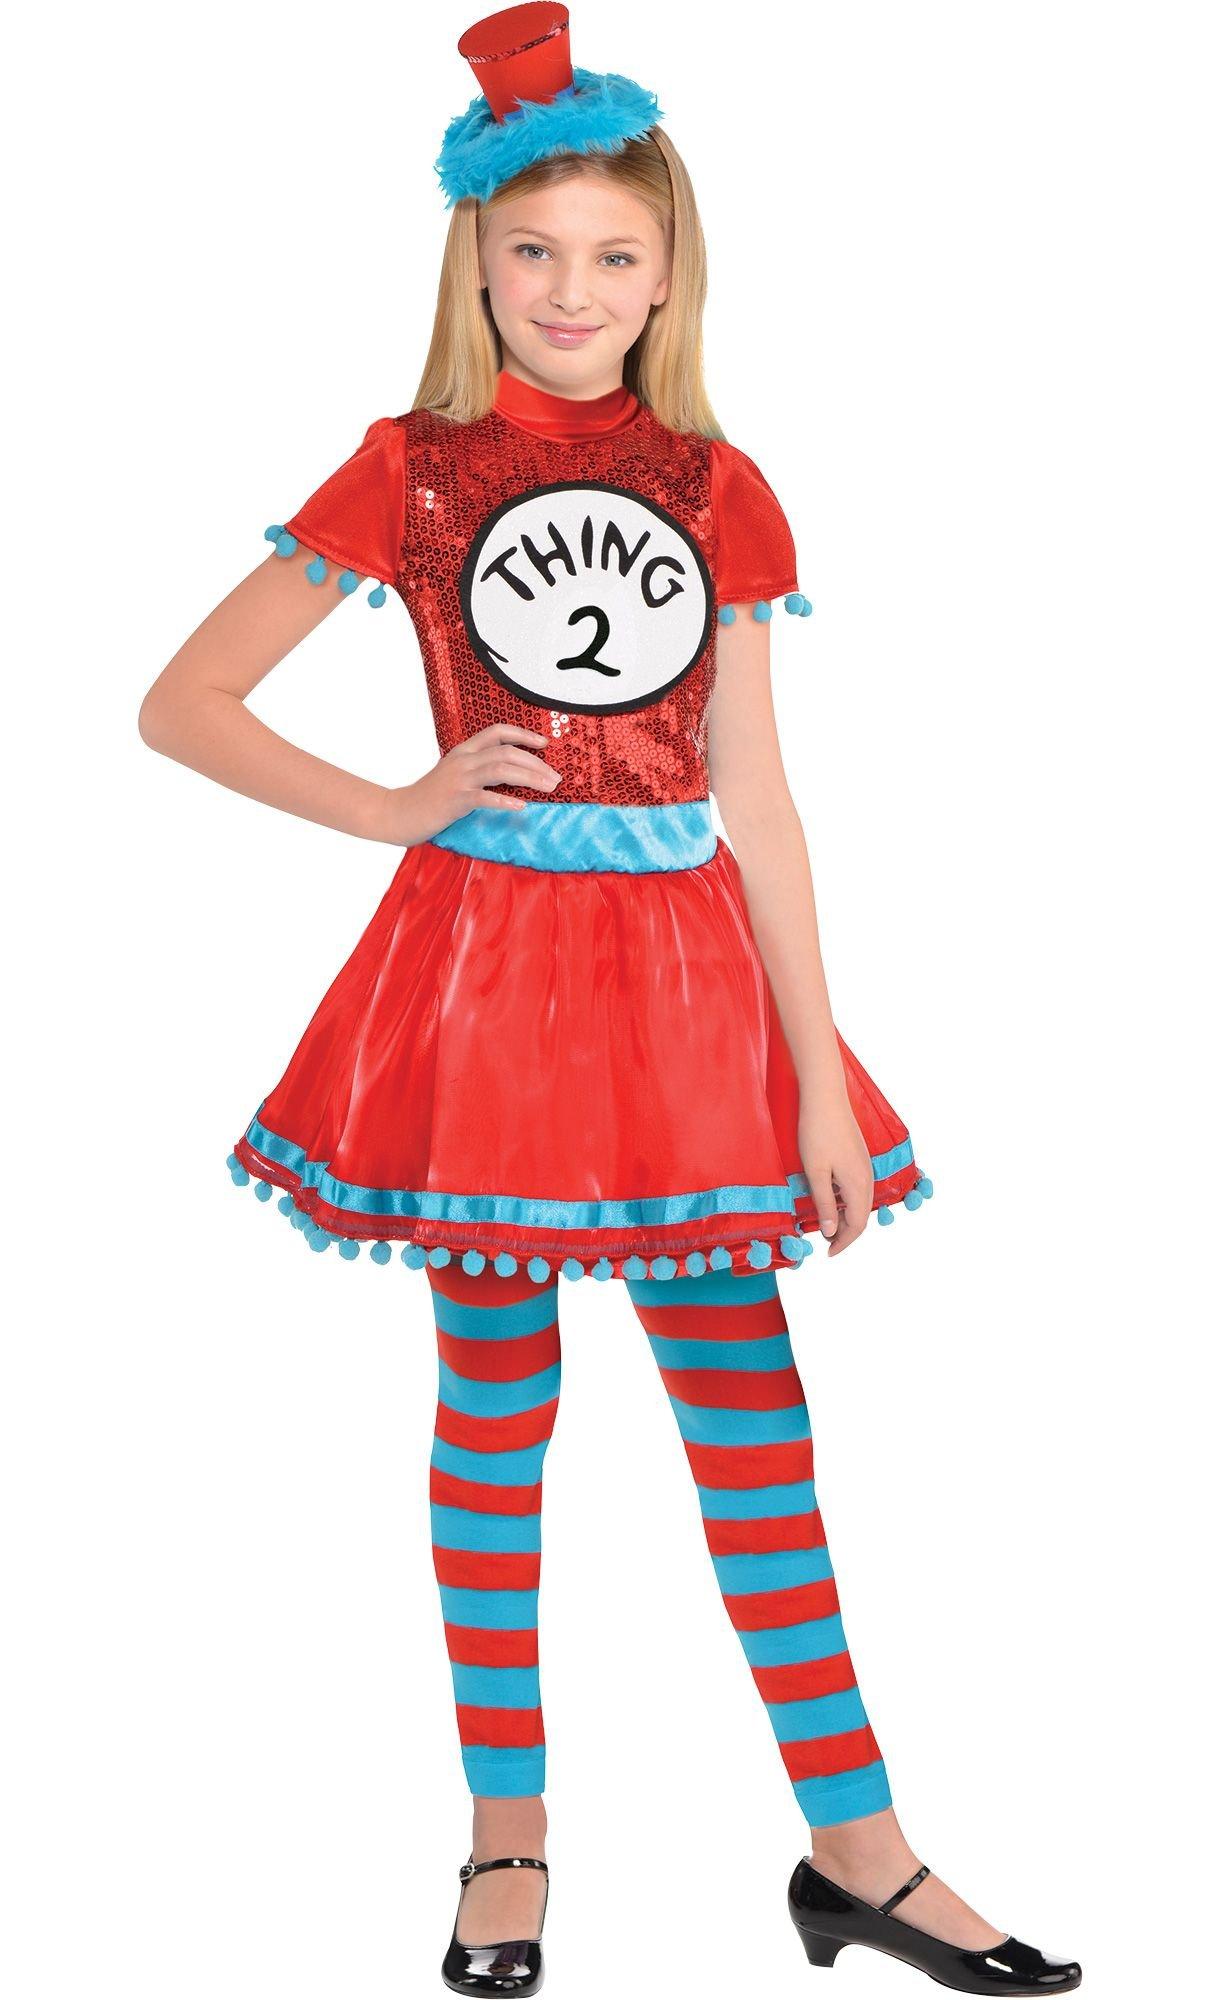 Girls Thing 1 & Thing 2 Dress Costume - Dr. Seuss | Party City